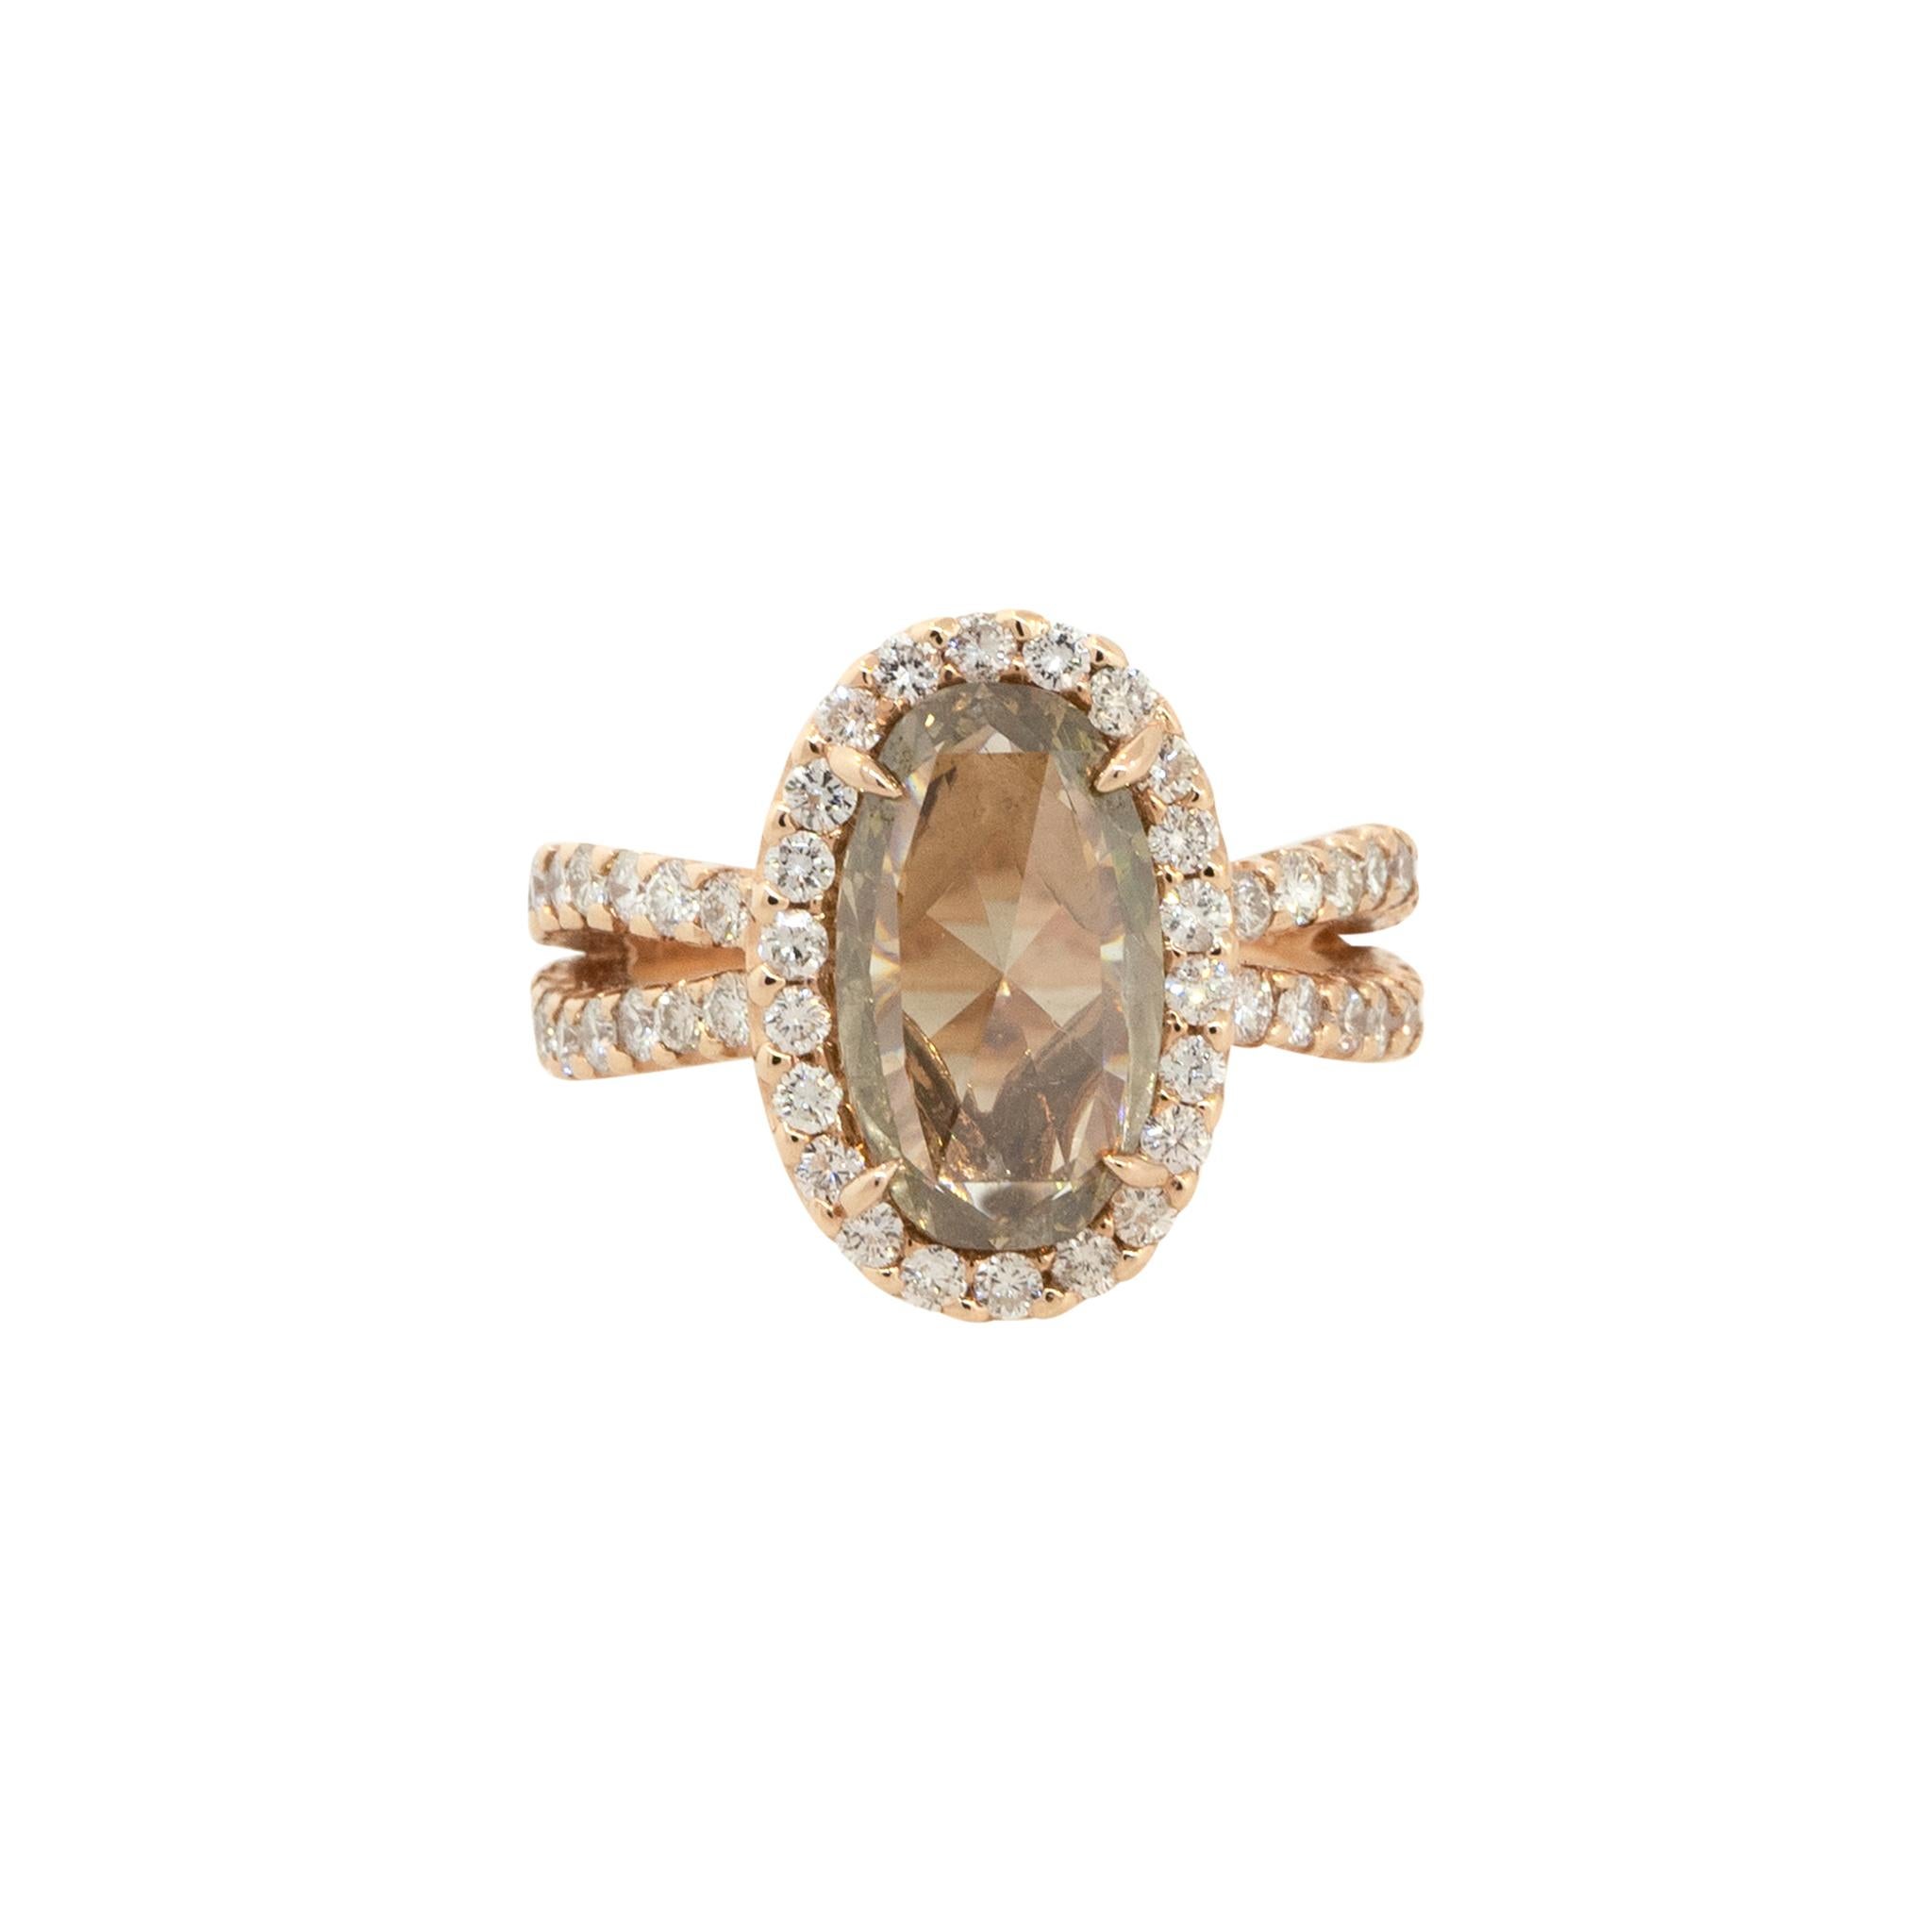 14k Rose Gold 2.80ctw Fancy Brown Oval Diamond Halo Ring
Material: 14k Rose Gold
Center Diamond Details: Approx. 2.80ctw Oval Cut Diamond. Center Diamond is Fancy Brown in color and SI2 in clarity
Mounting Details: Approx. 1.00ctw of Round Diamonds